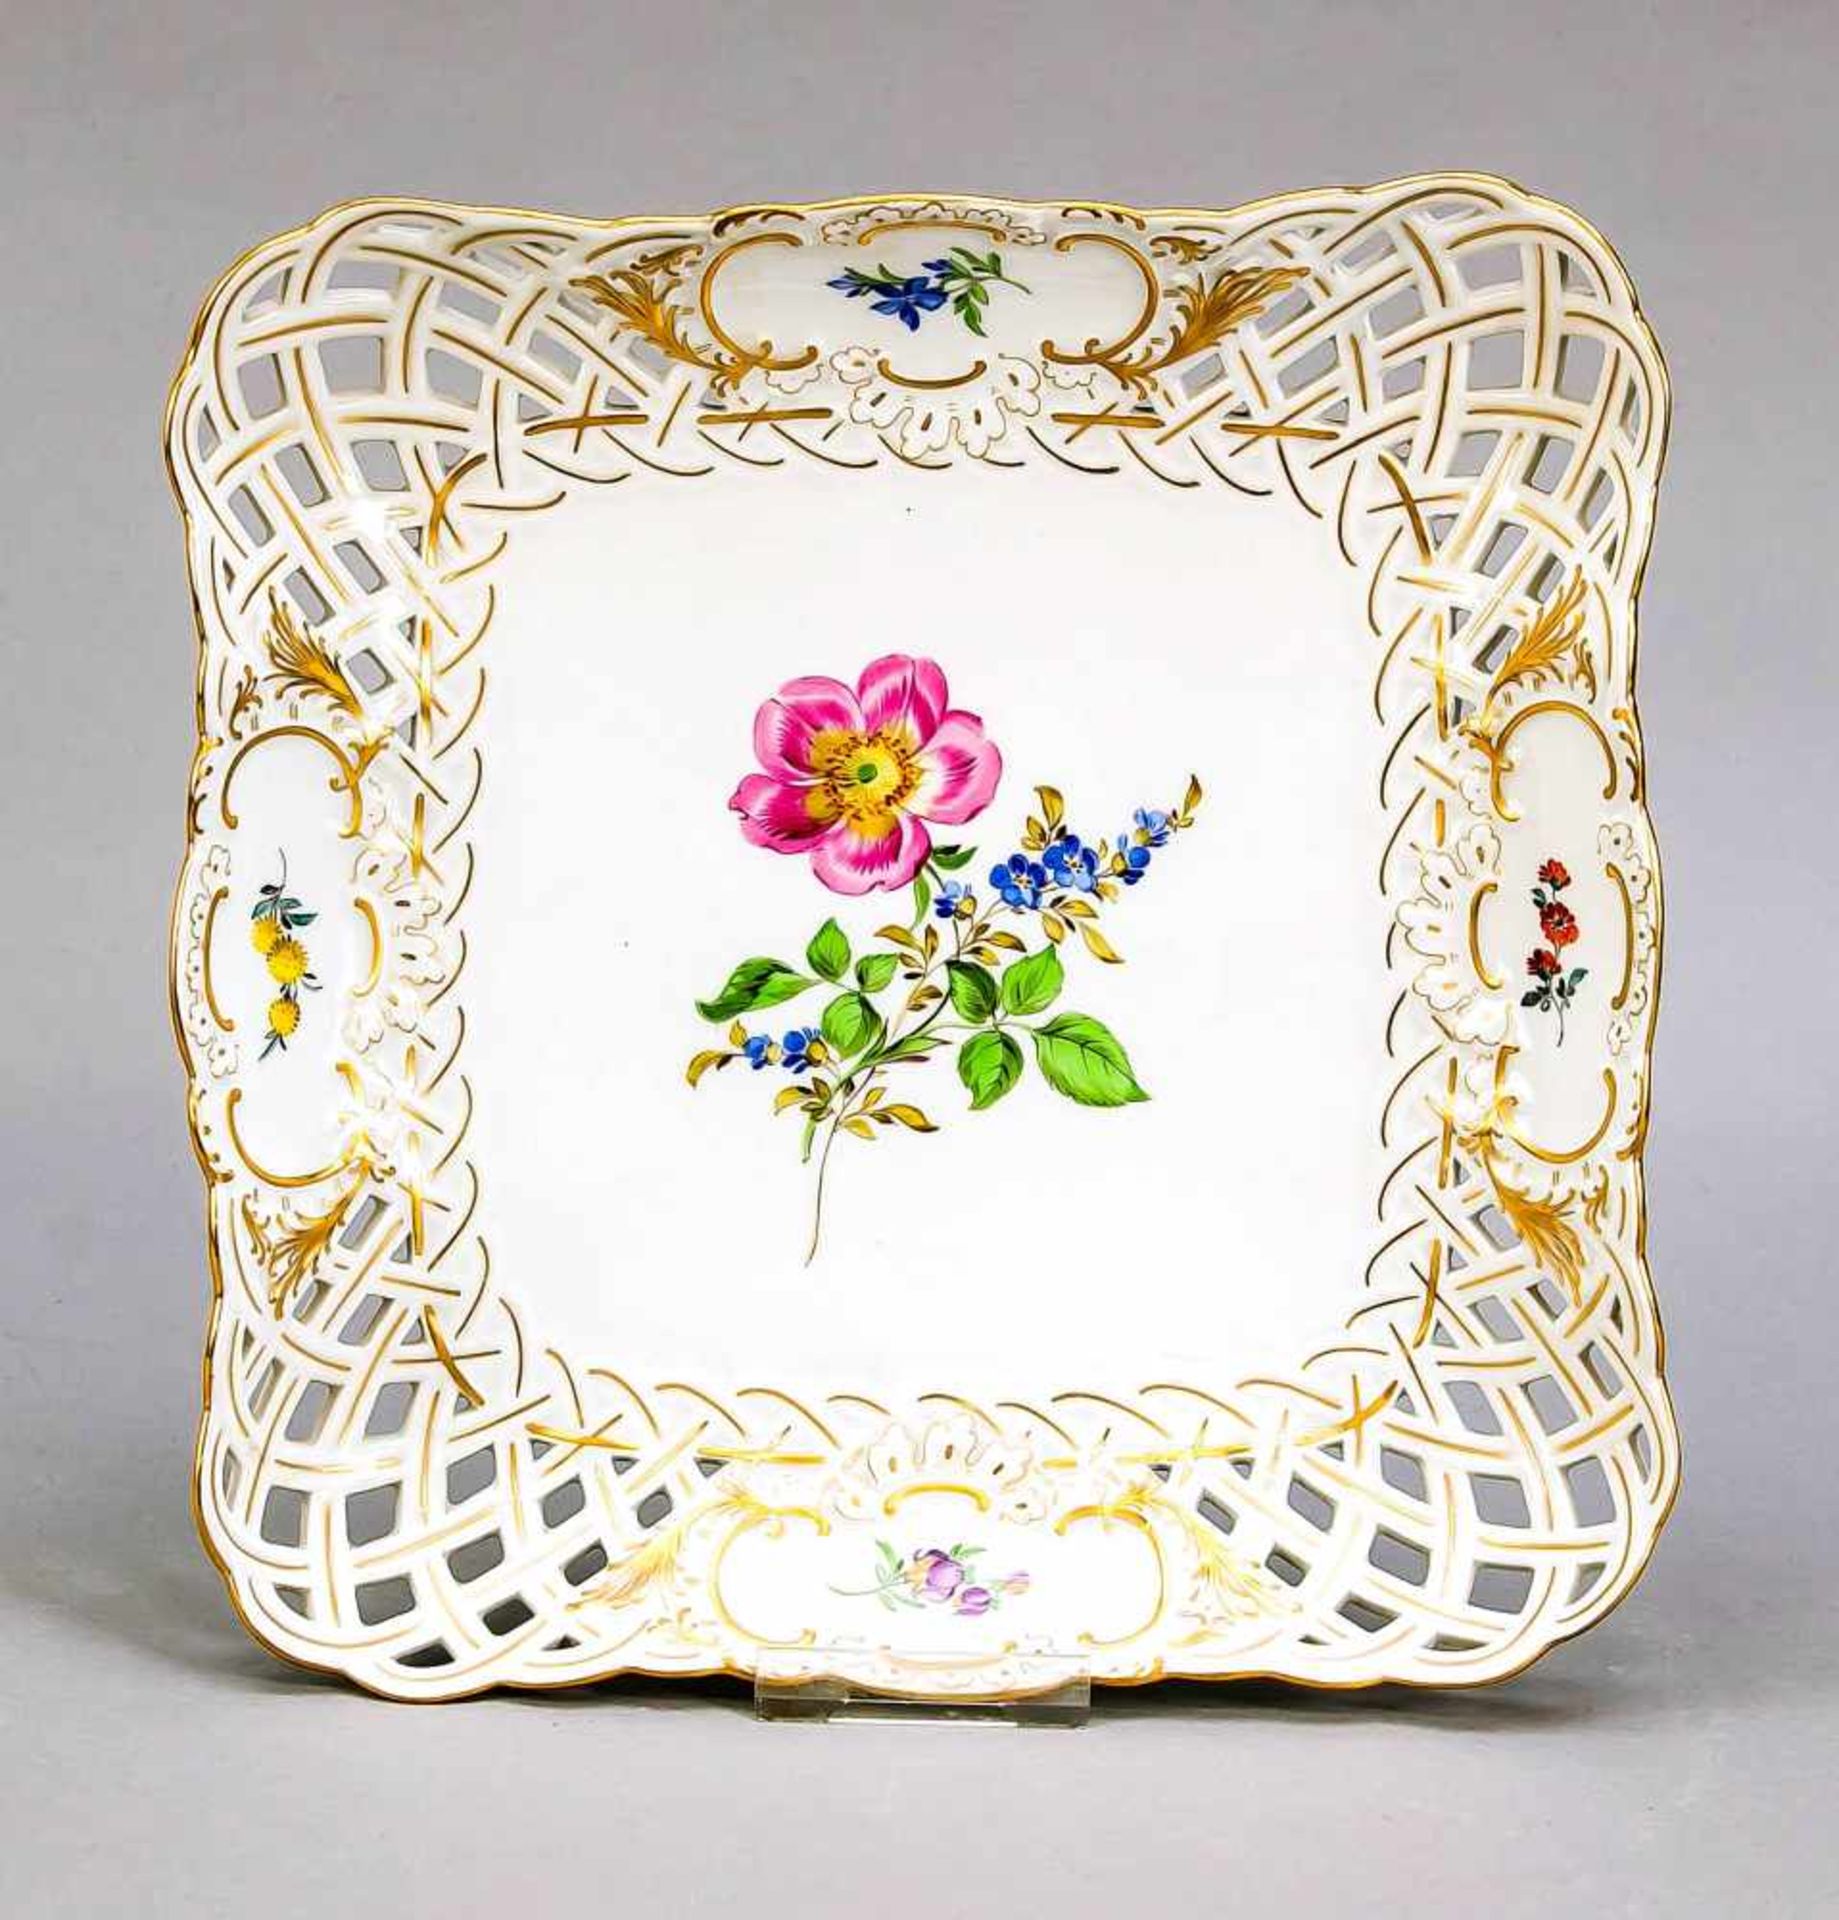 Breakthrough Carree bowl, Meissen, mark 1957-72, 2nd quality, polychrome flower paintingin the